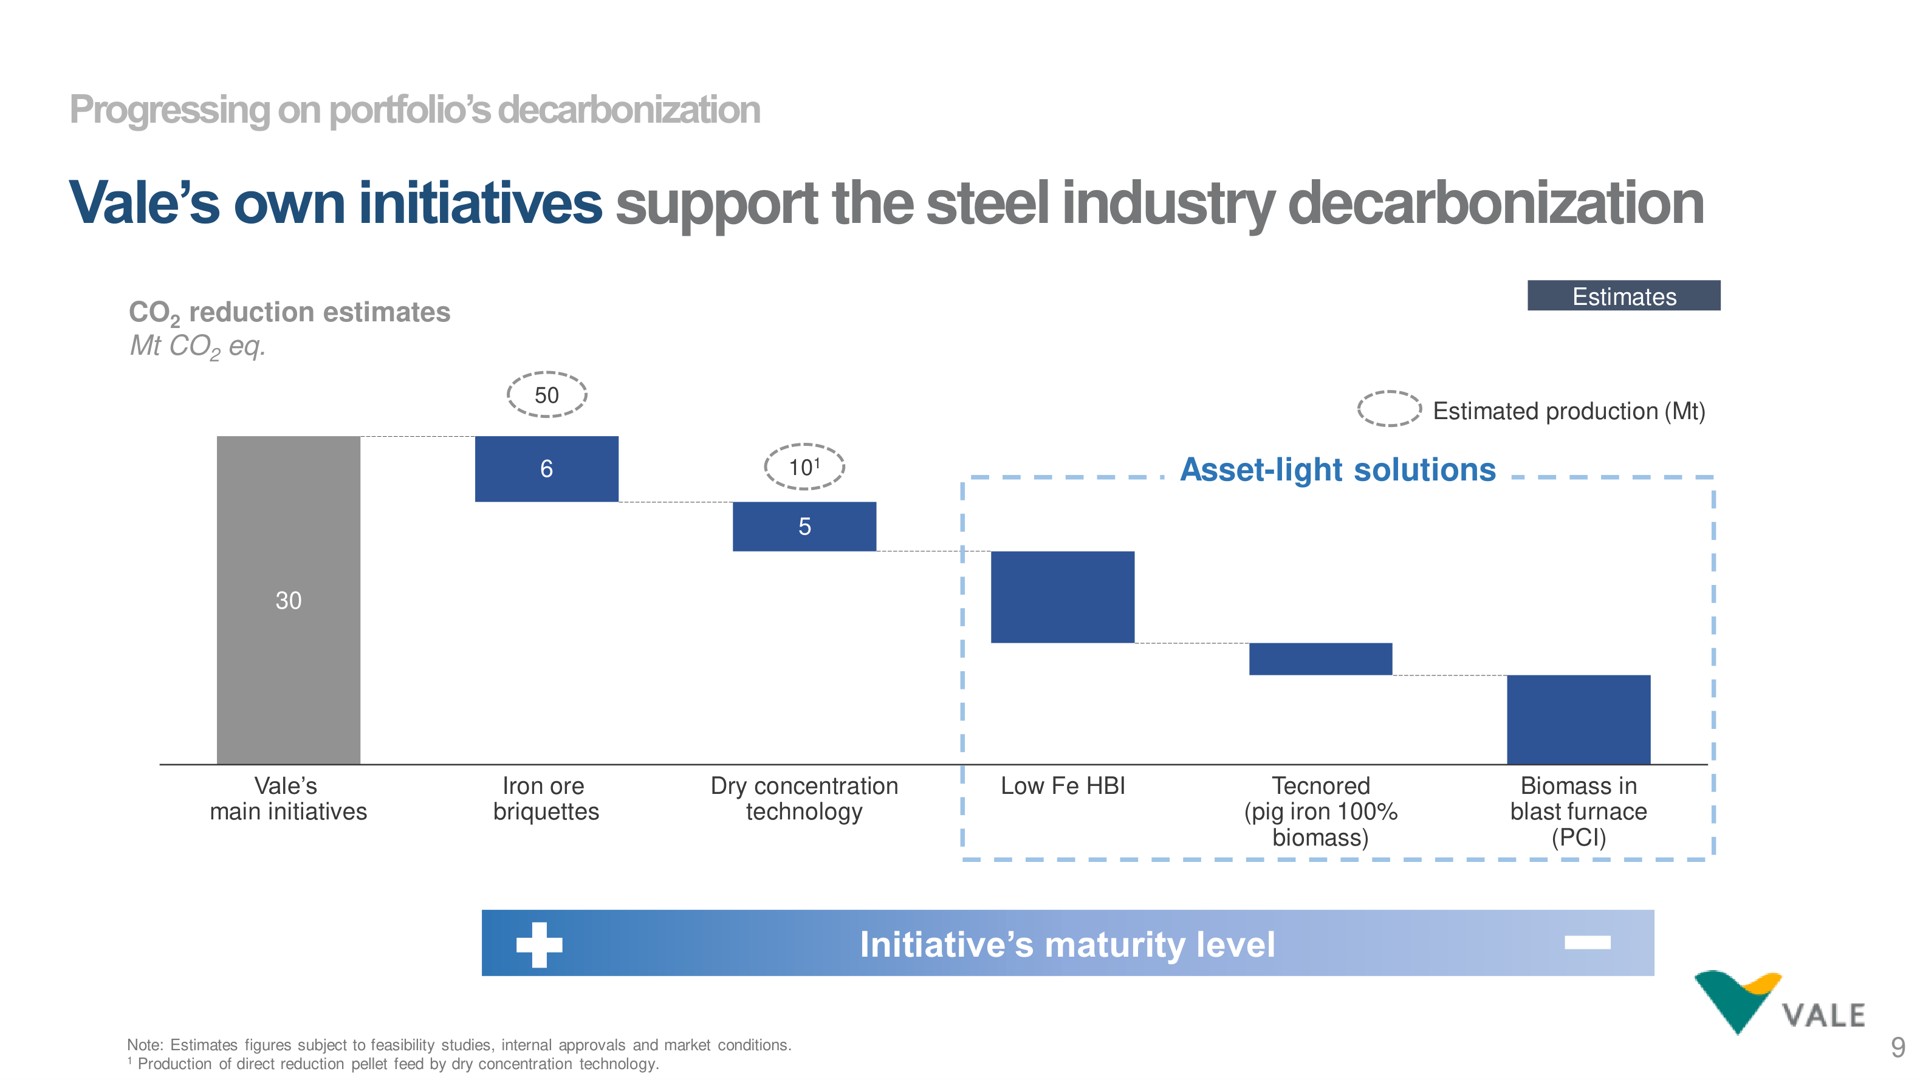 vale own initiatives support the steel industry decarbonization | Vale